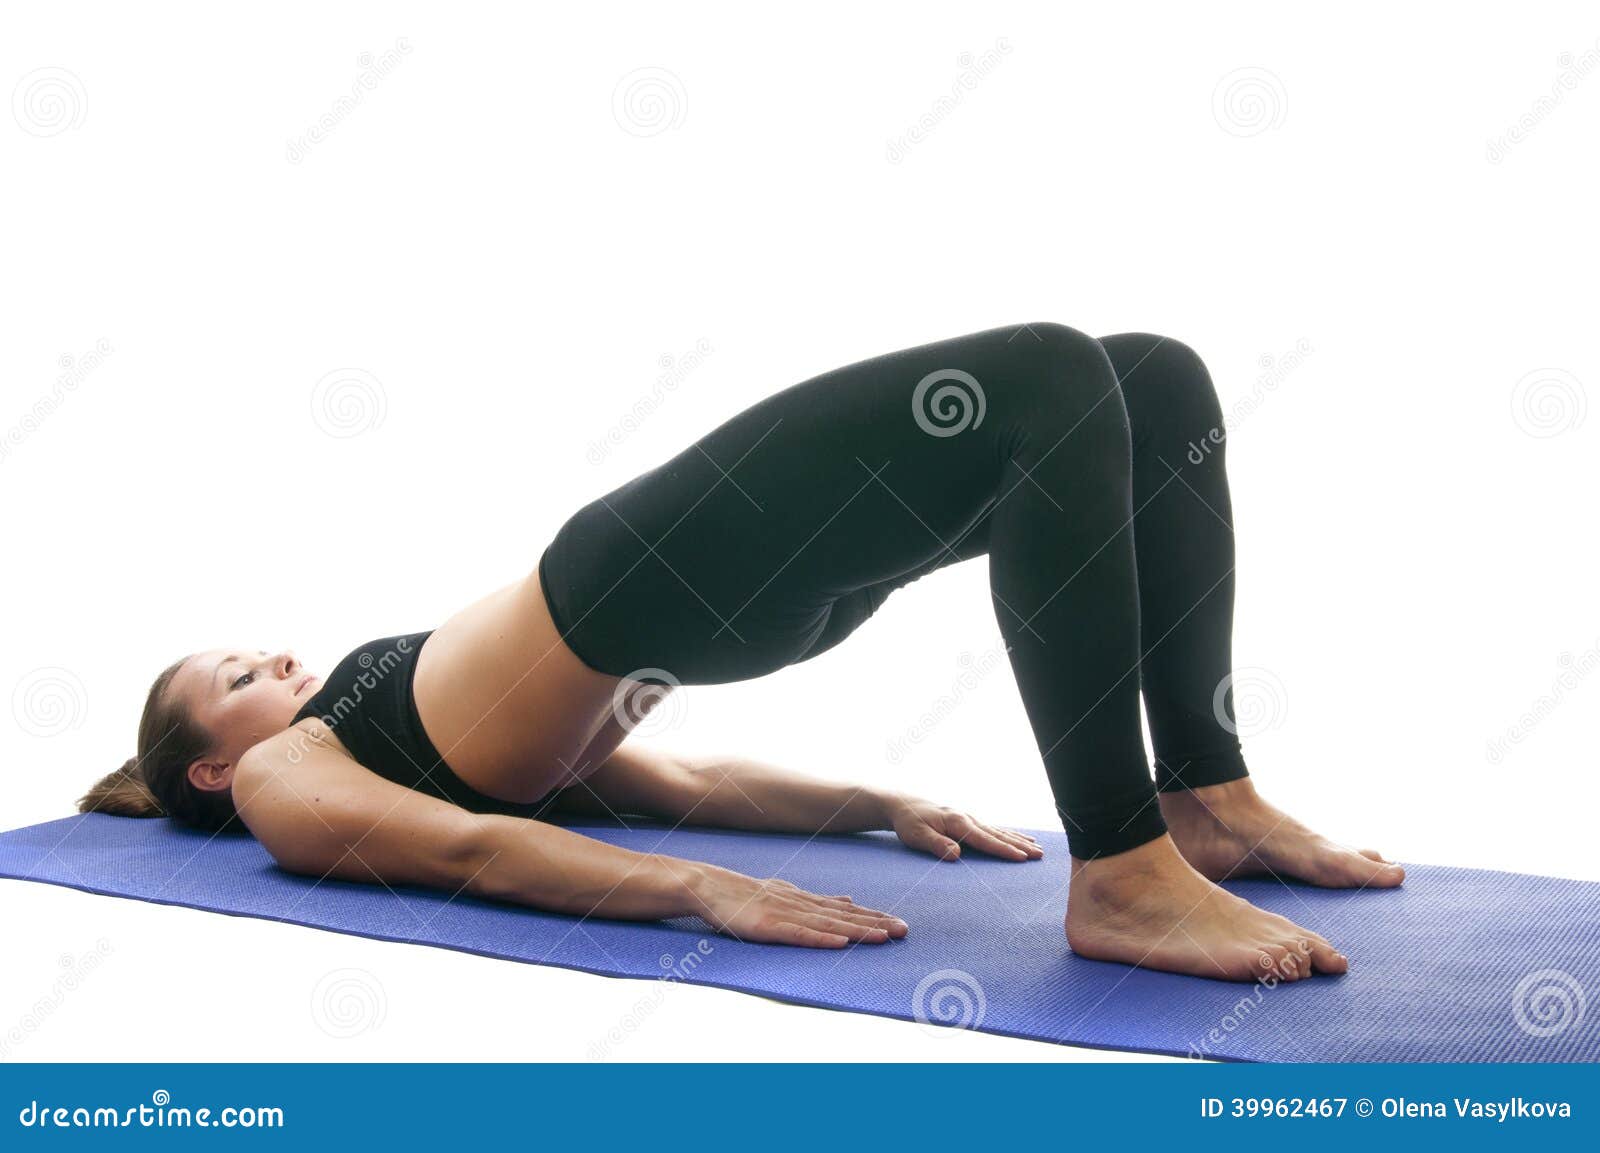 YOGA POSES TO ADD ACTIVITY TO YOUR SEDENTARY LIFESTYLE | Zoom TV